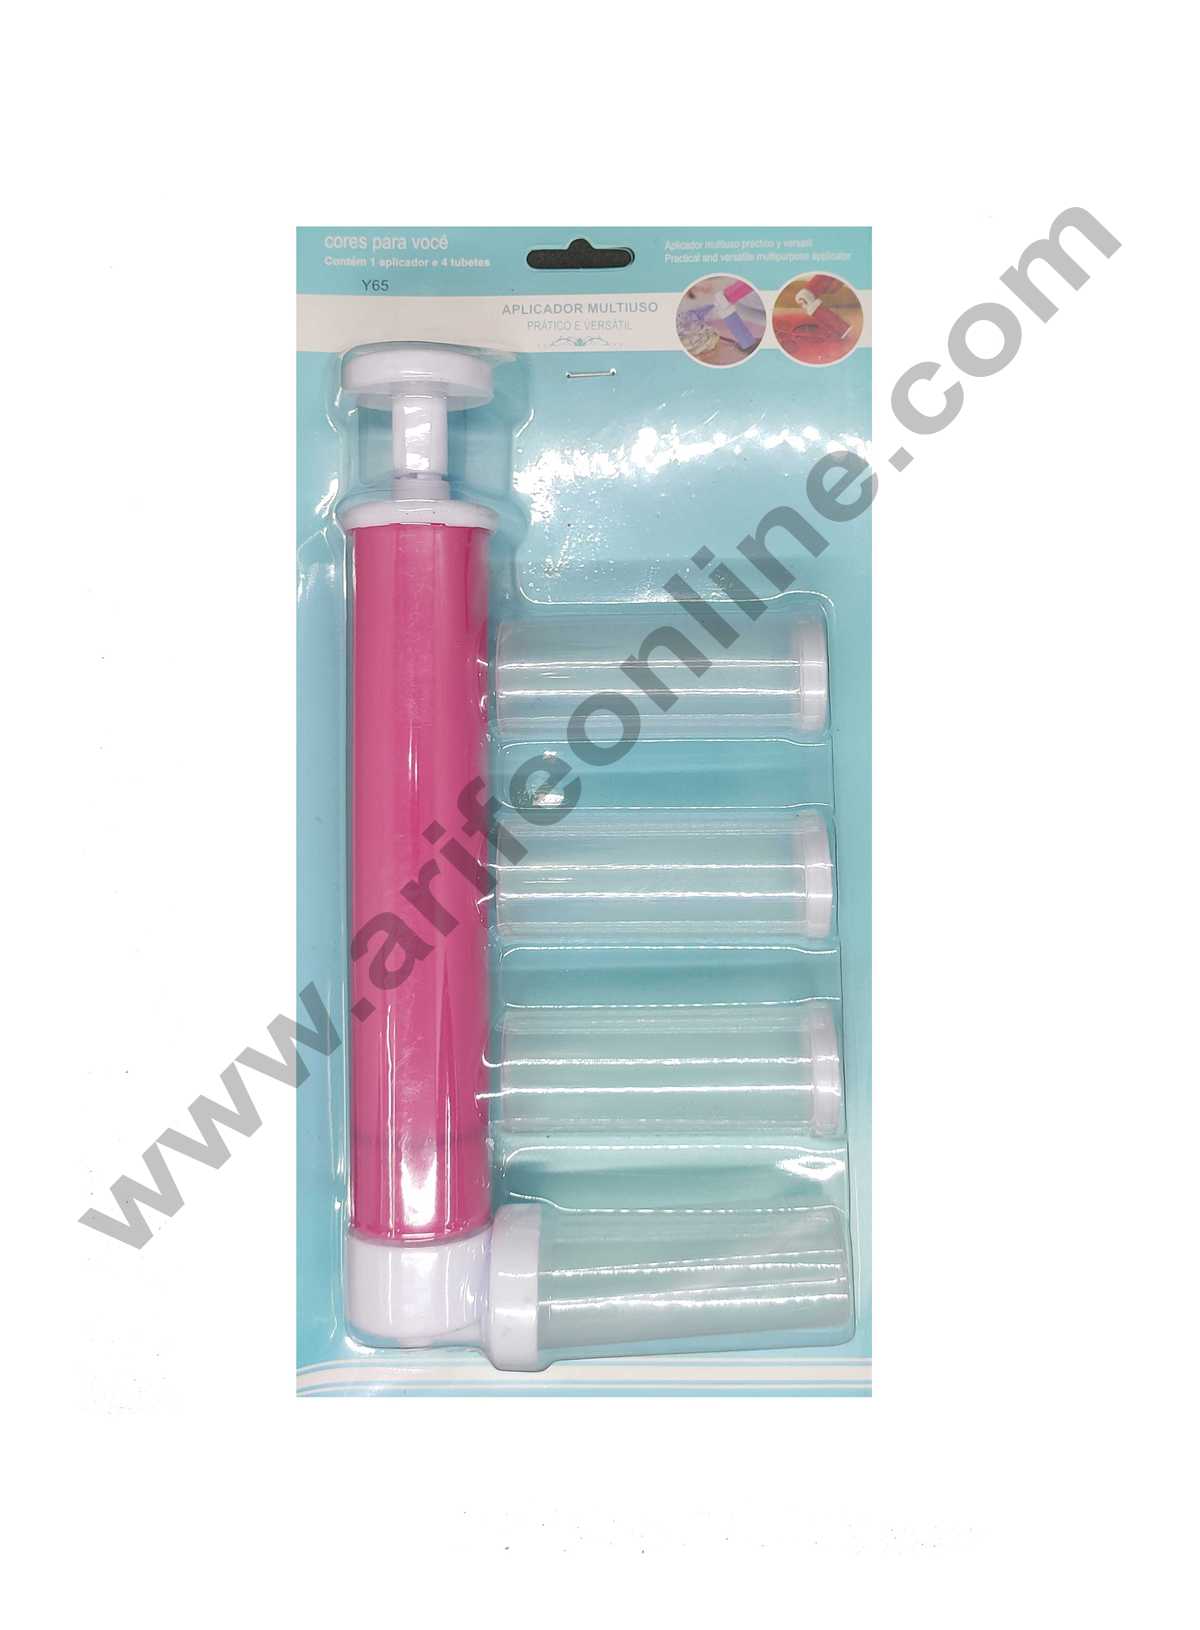 Cake Decor Manual Airbrush Pump for Decorating Cakes, Cupcakes and Des –  Arife Online Store